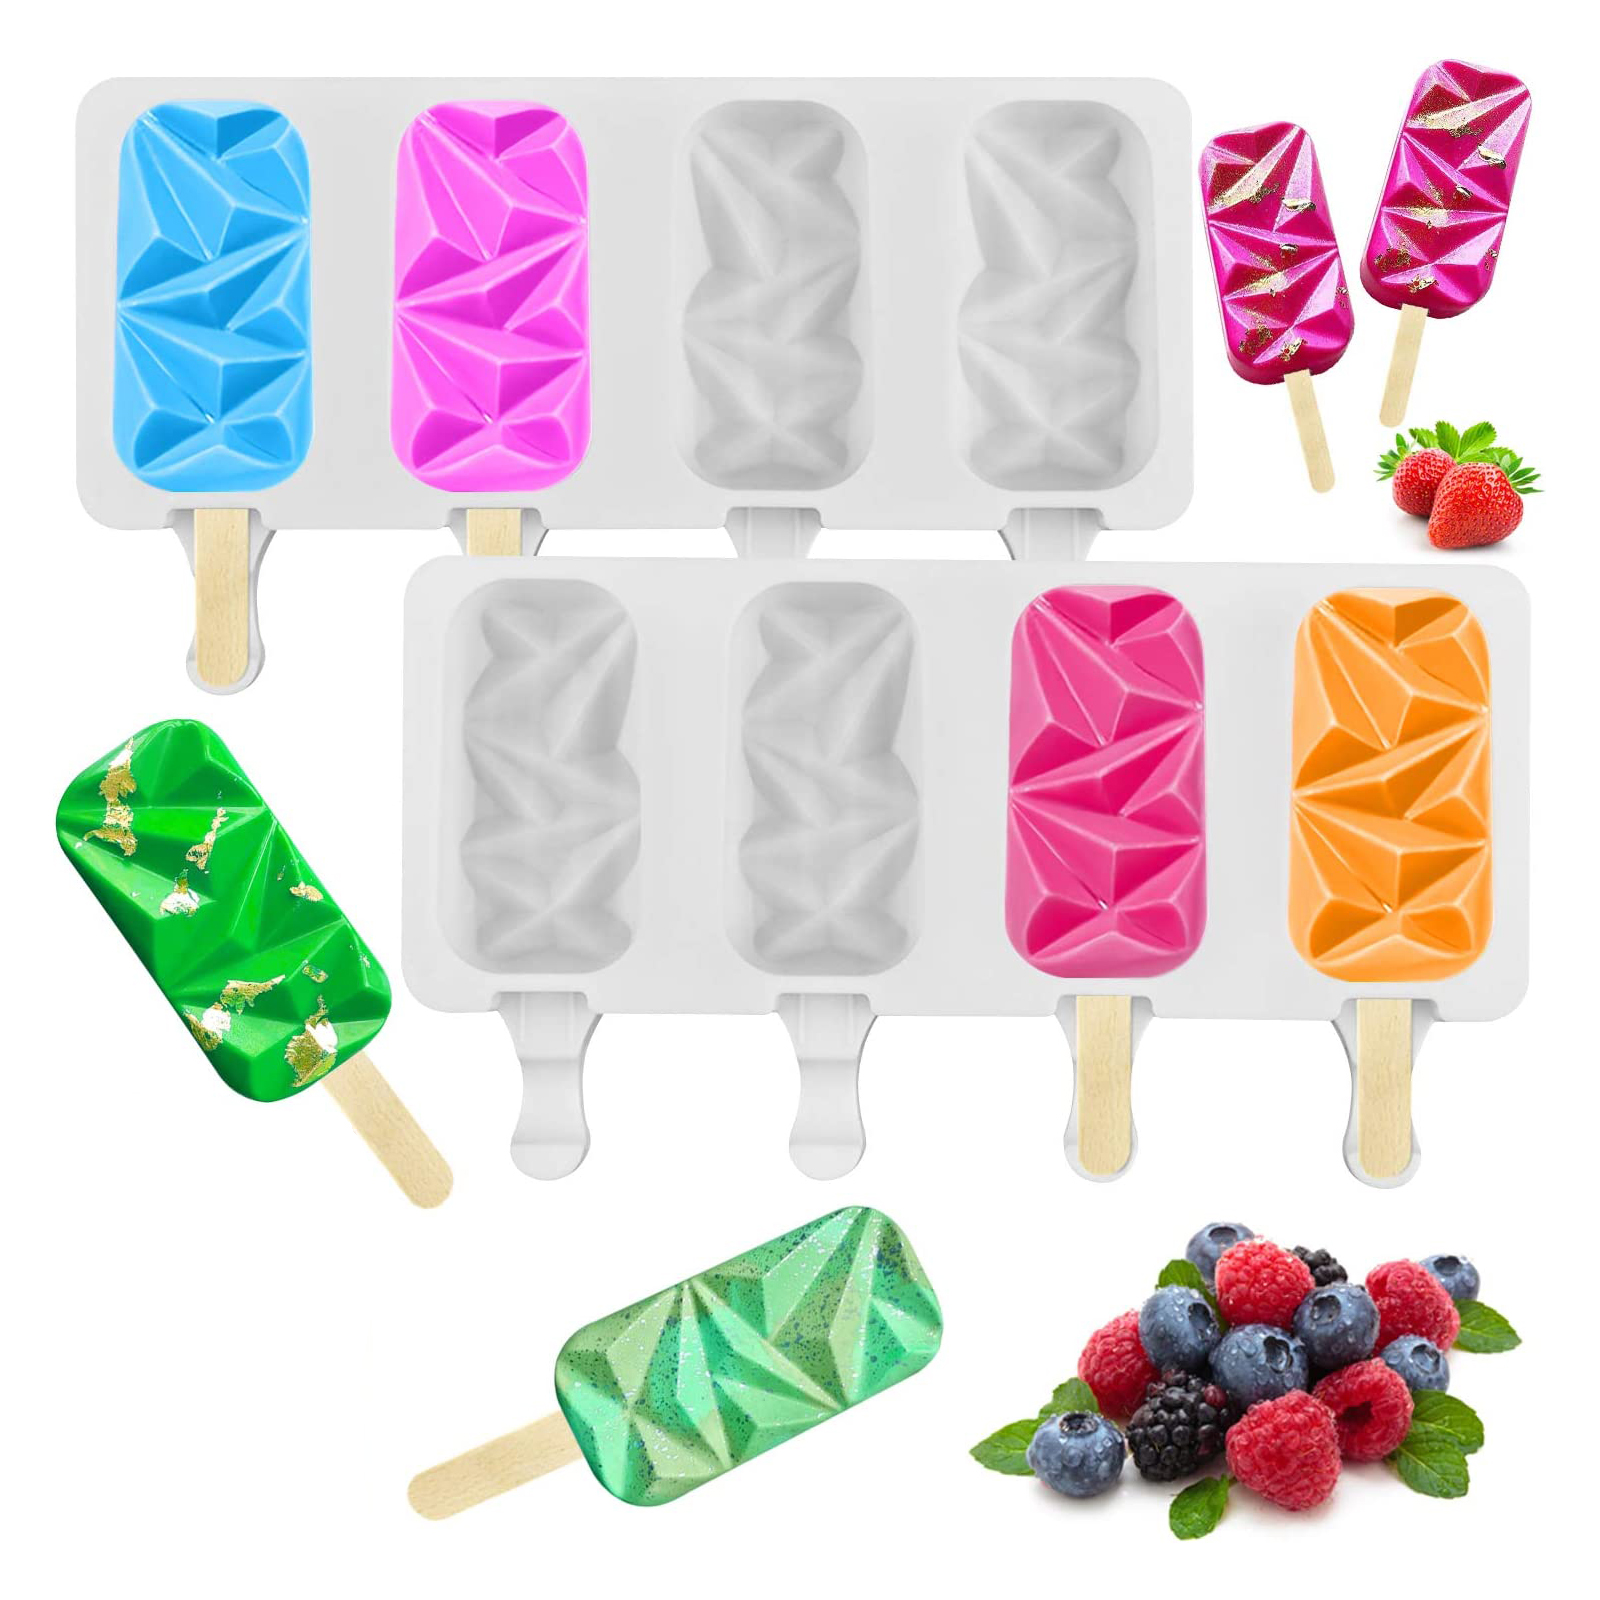  20pcs Acrylic Ice Cream Stick Popsicle Molds Popsicle Sticks  for Food Cake Popsicle Sticks Popsicles Molds Mini Food Silicone Molds  Acrylic Stick for Ice Cream Hawaii Self Made : Arts, Crafts